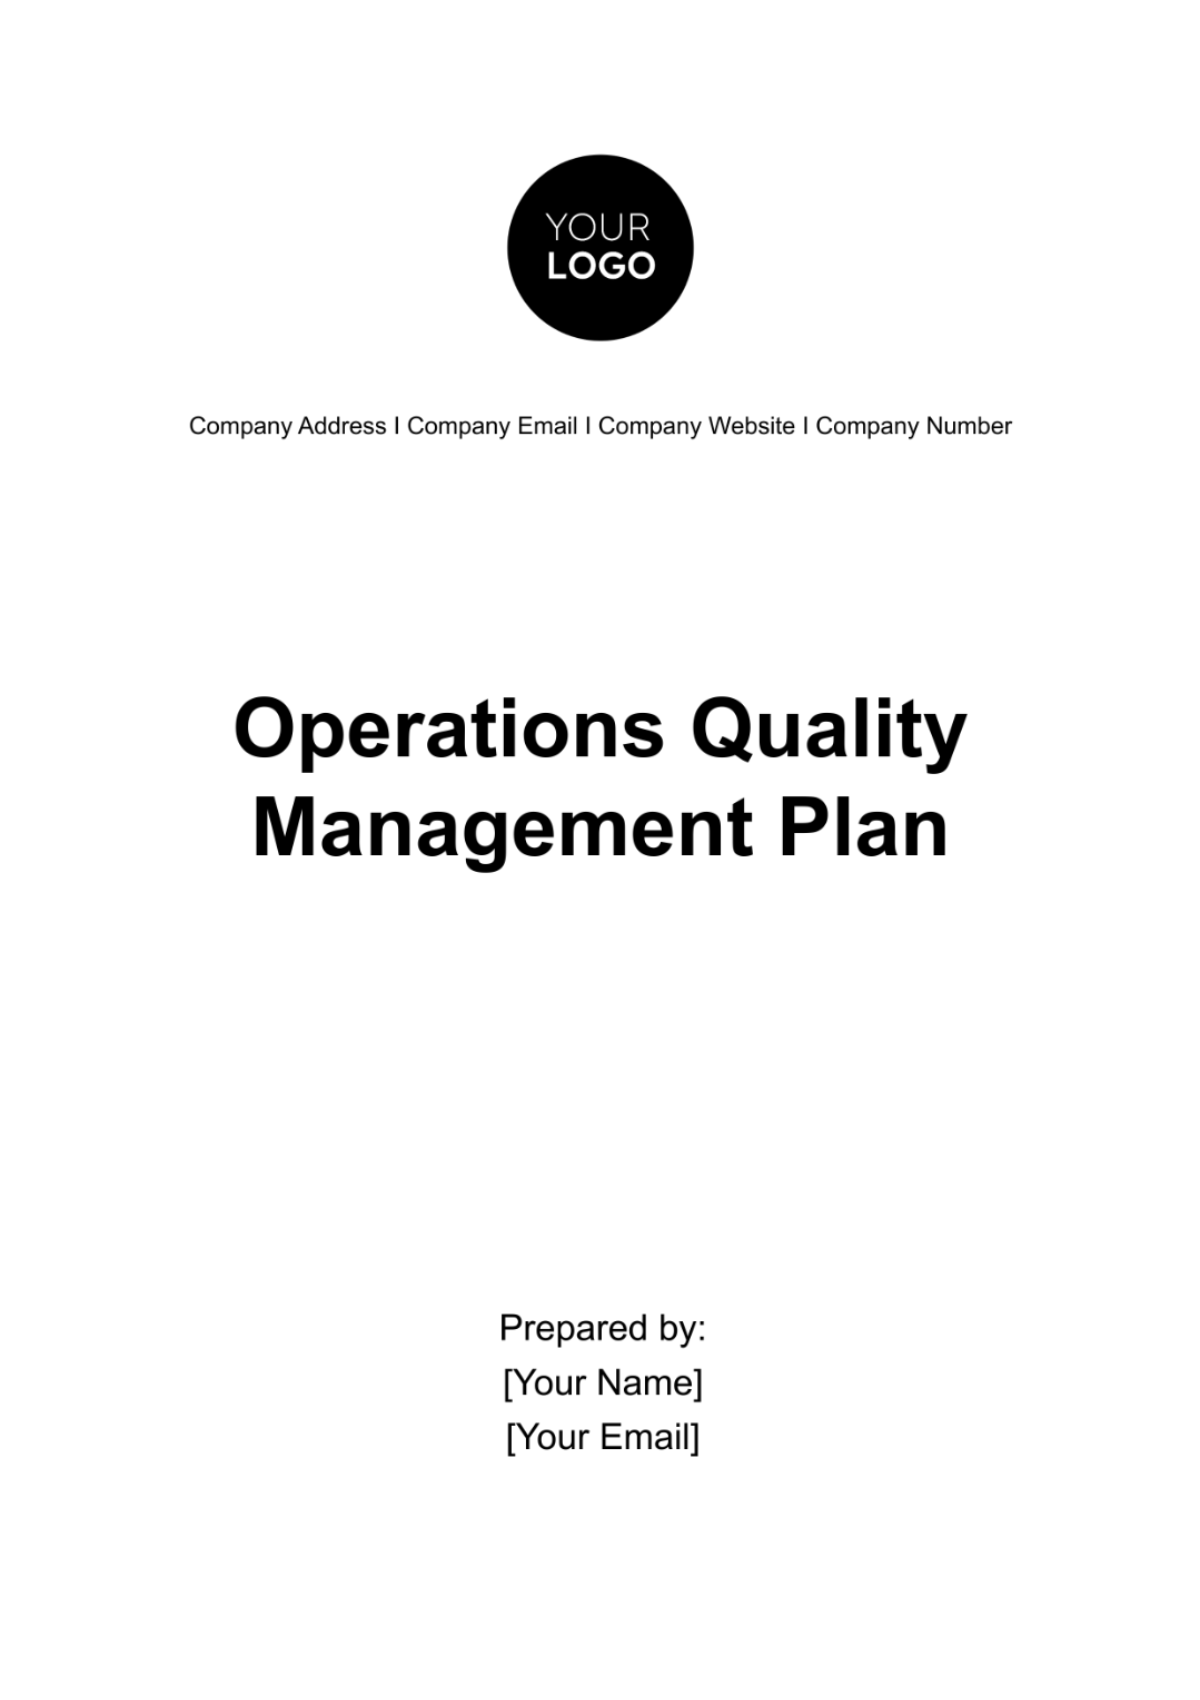 Operations Quality Management Plan Template